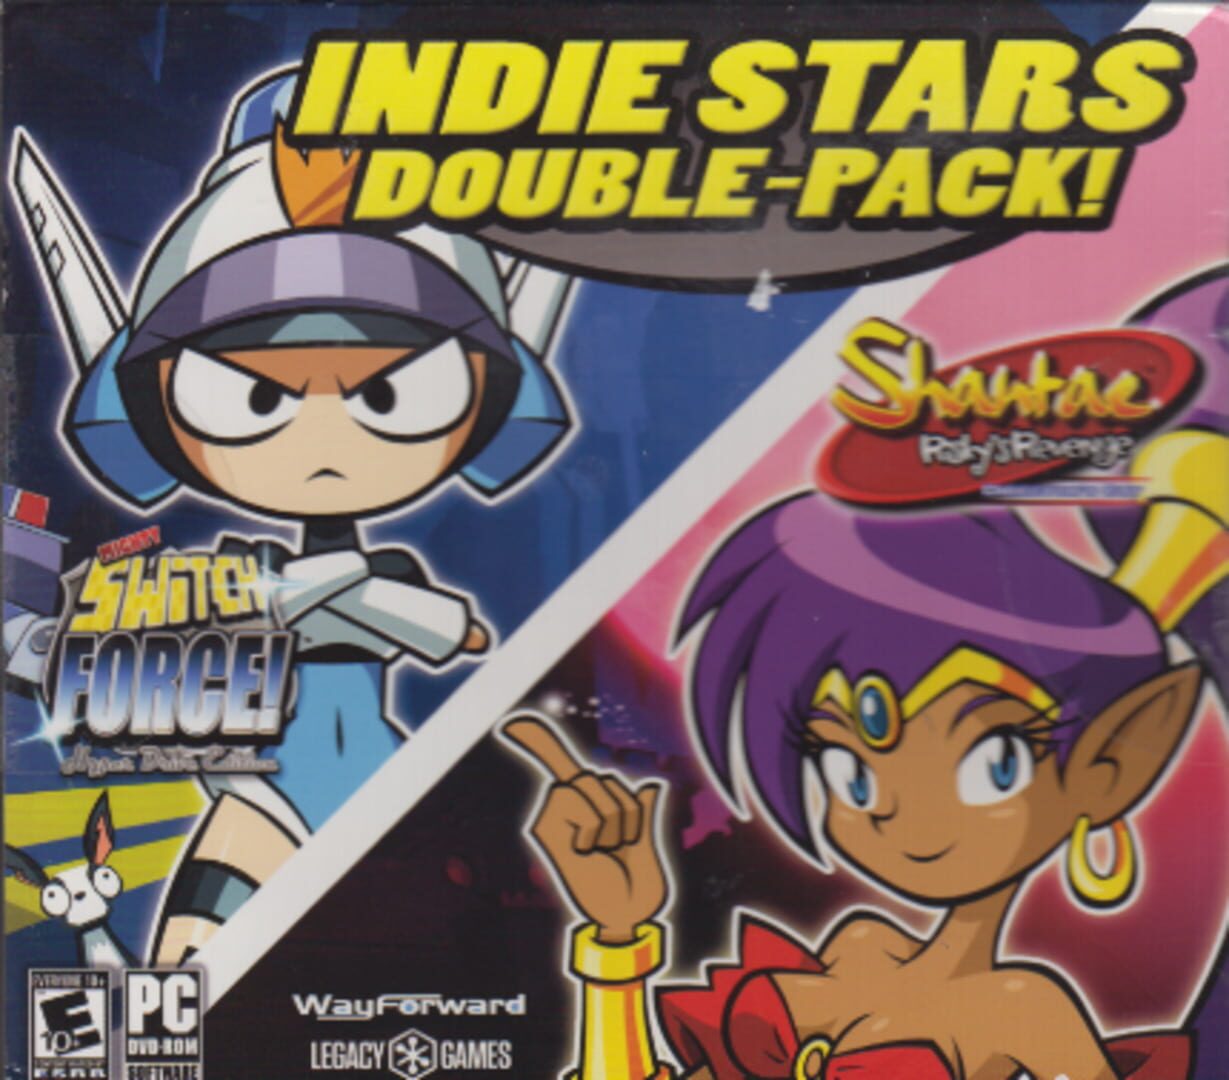 Indie Stars Double-Pack!